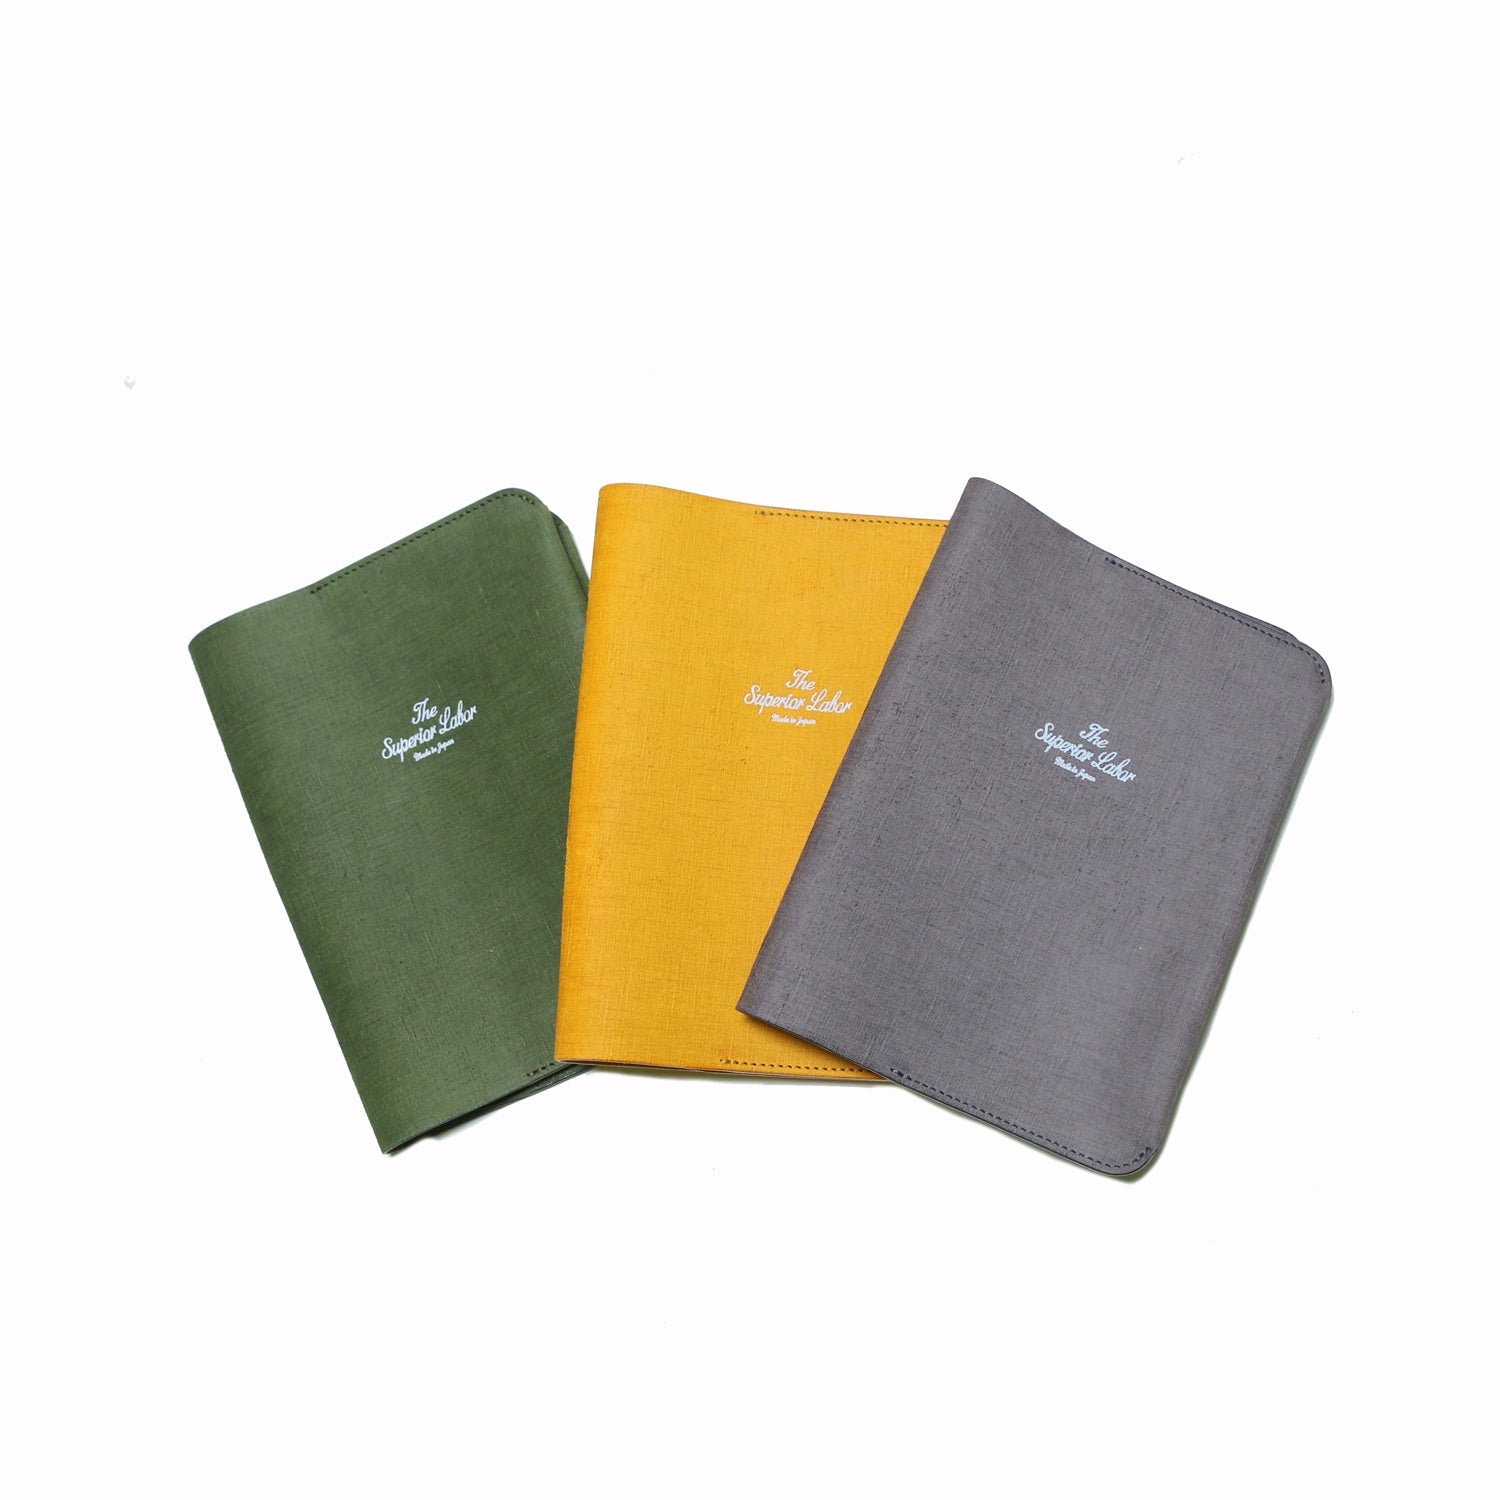 SL650 B6 notebook cover